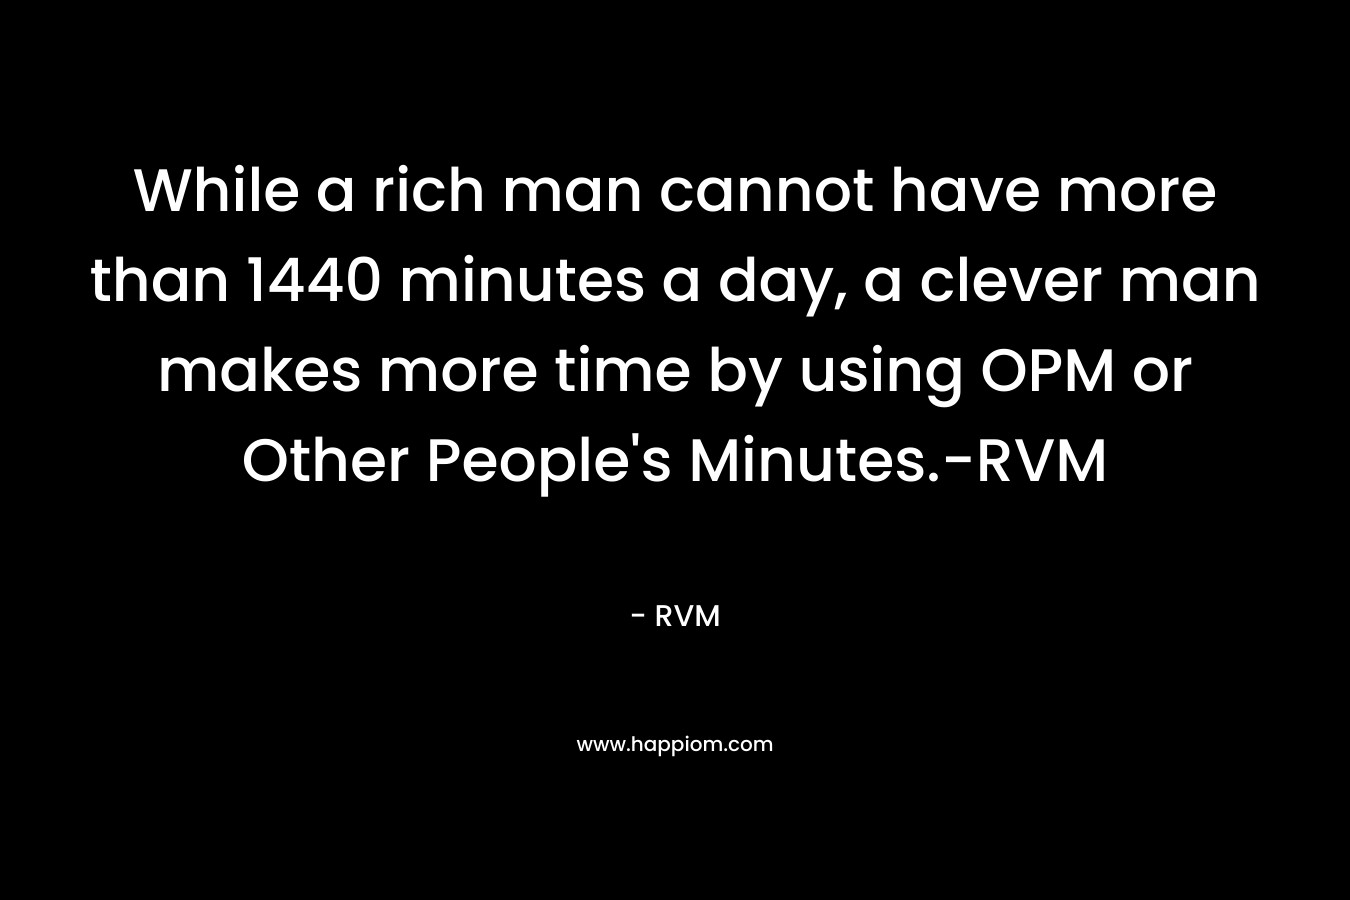 While a rich man cannot have more than 1440 minutes a day, a clever man makes more time by using OPM or Other People's Minutes.-RVM